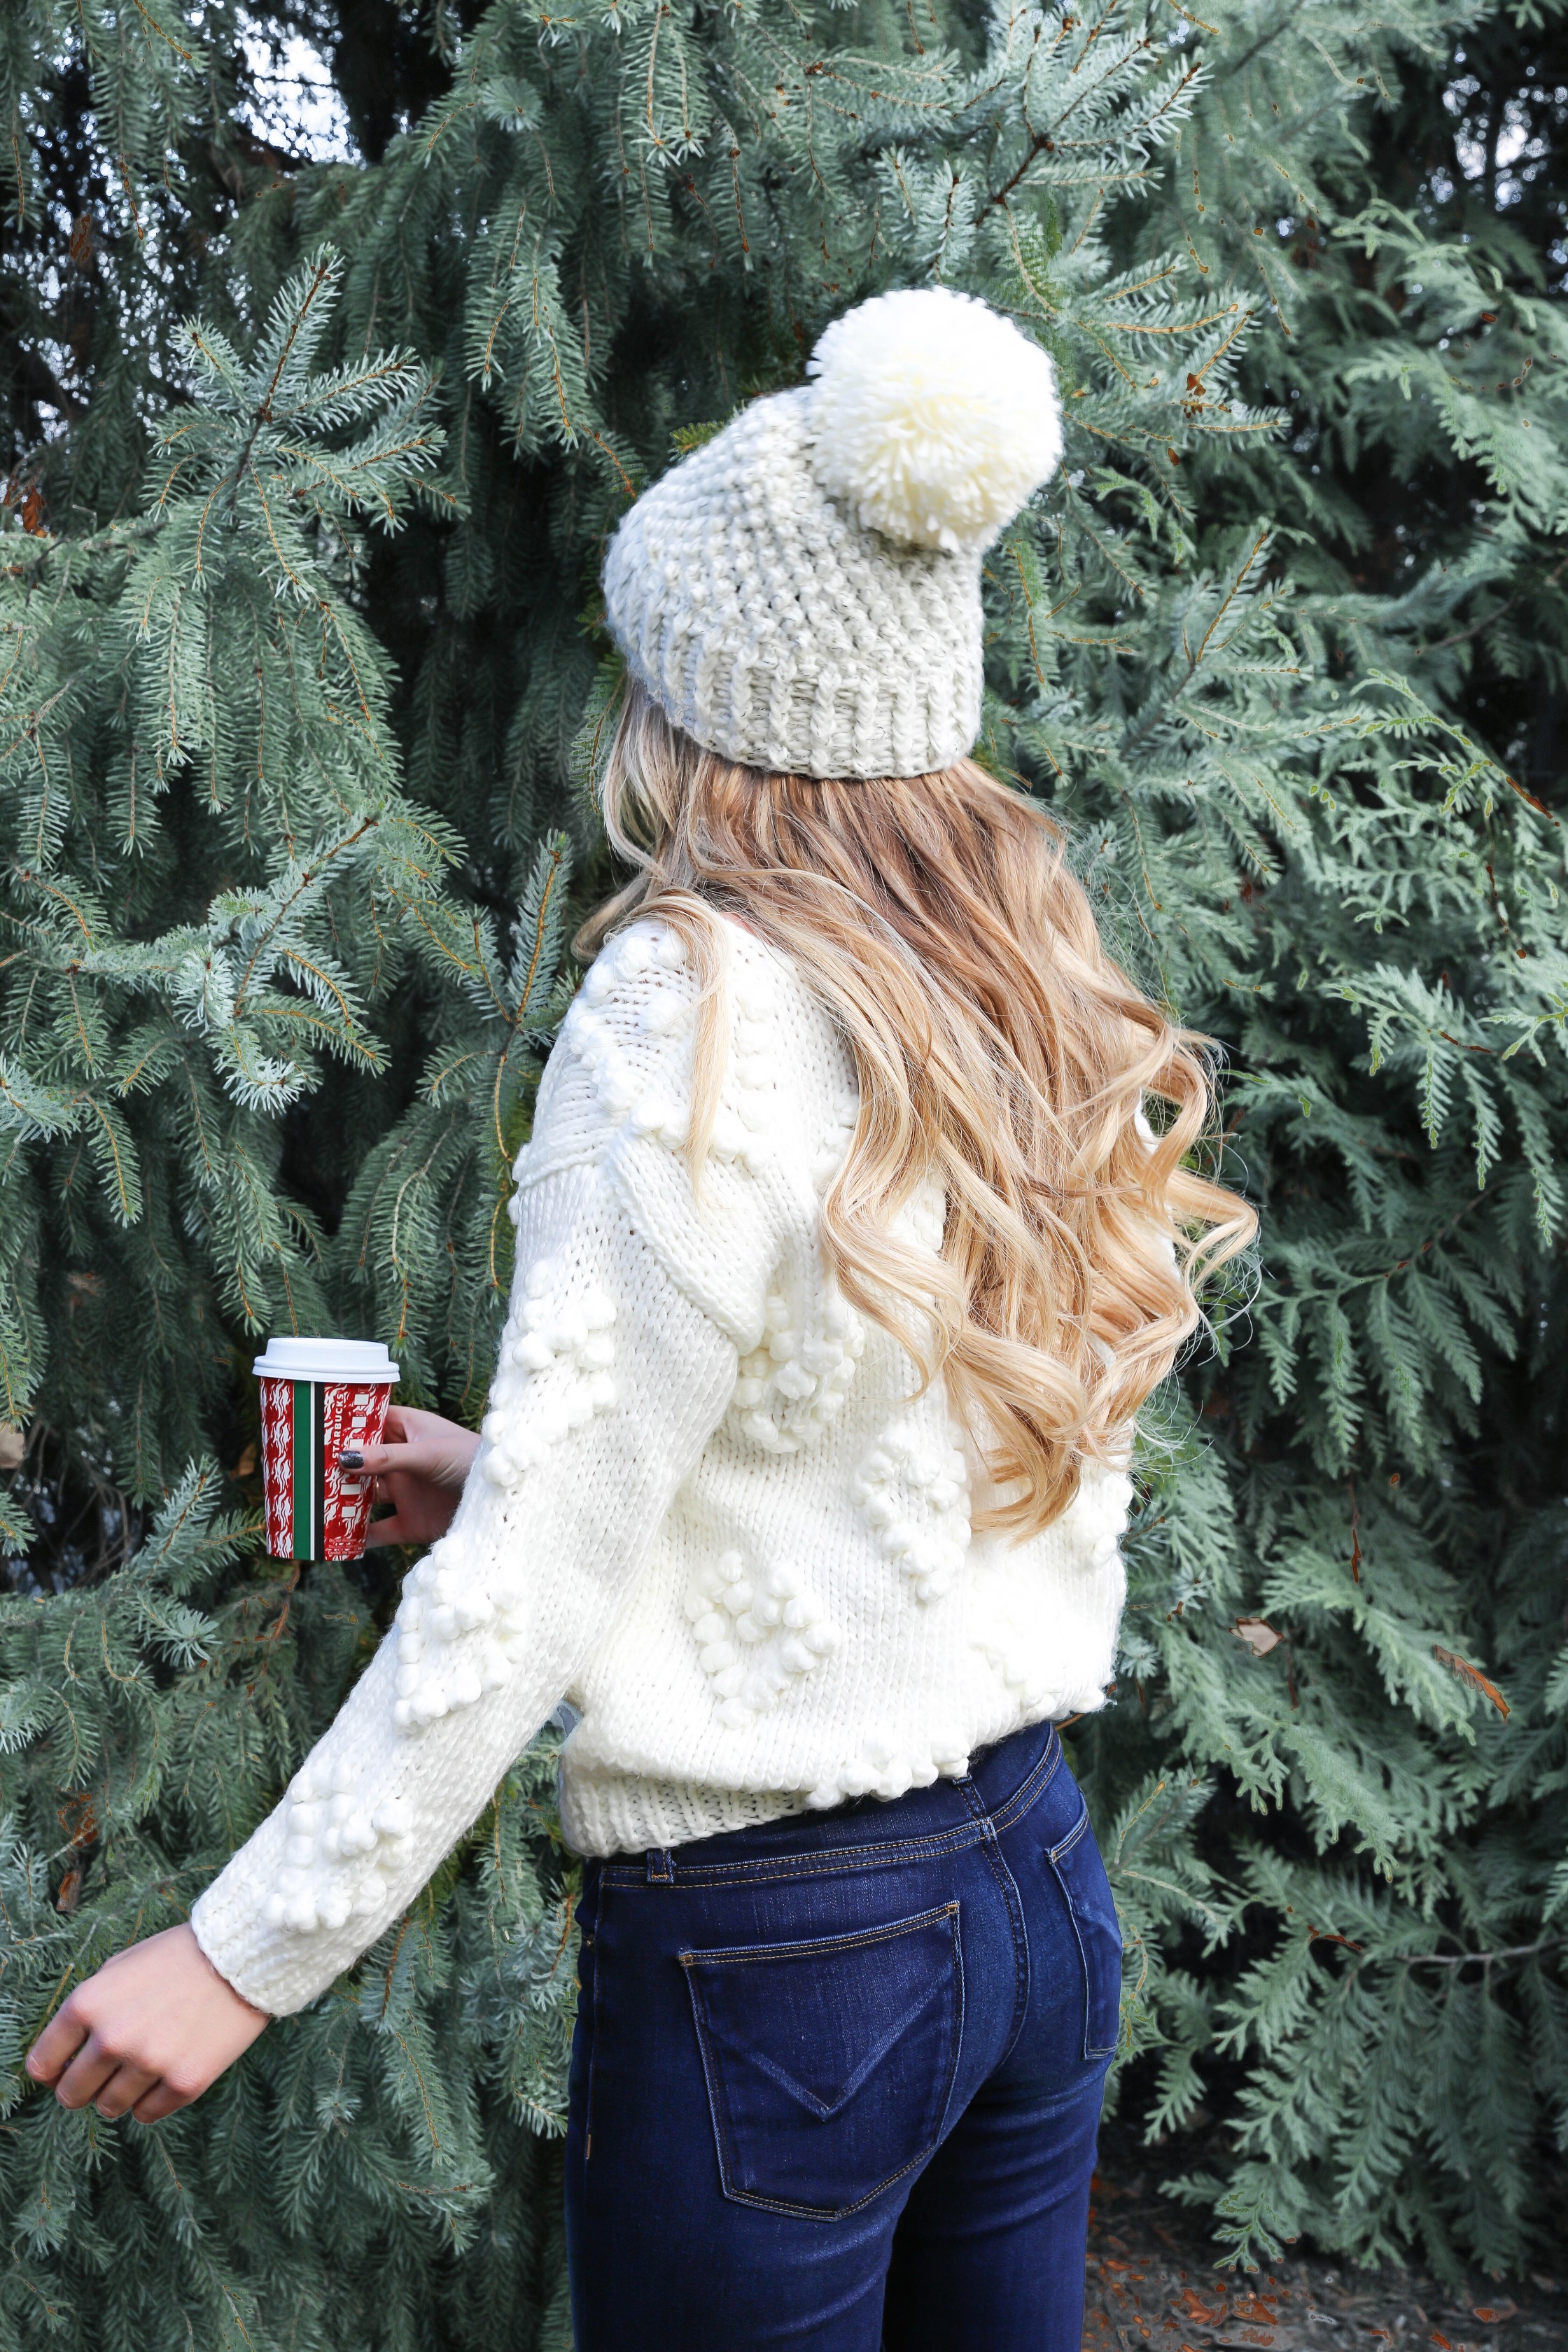 Christmas beanie roundup! The cutest winter hats that I am loving! Also wearing this cute chicwish heart pom sweater! Cute christmas tree photo idea! All details on fashion blog daily dose of charm by lauren lindmark